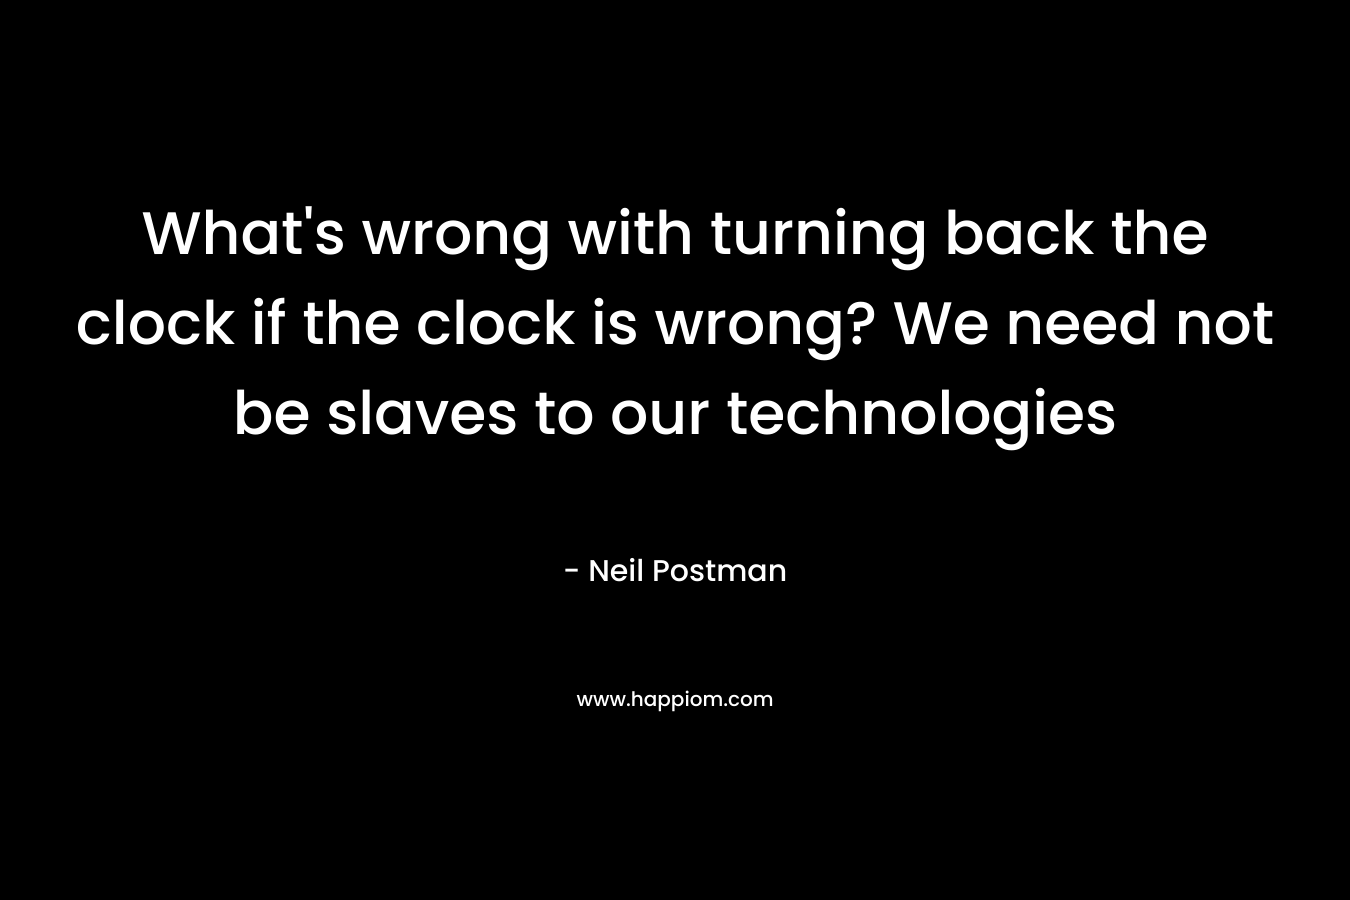 What's wrong with turning back the clock if the clock is wrong? We need not be slaves to our technologies